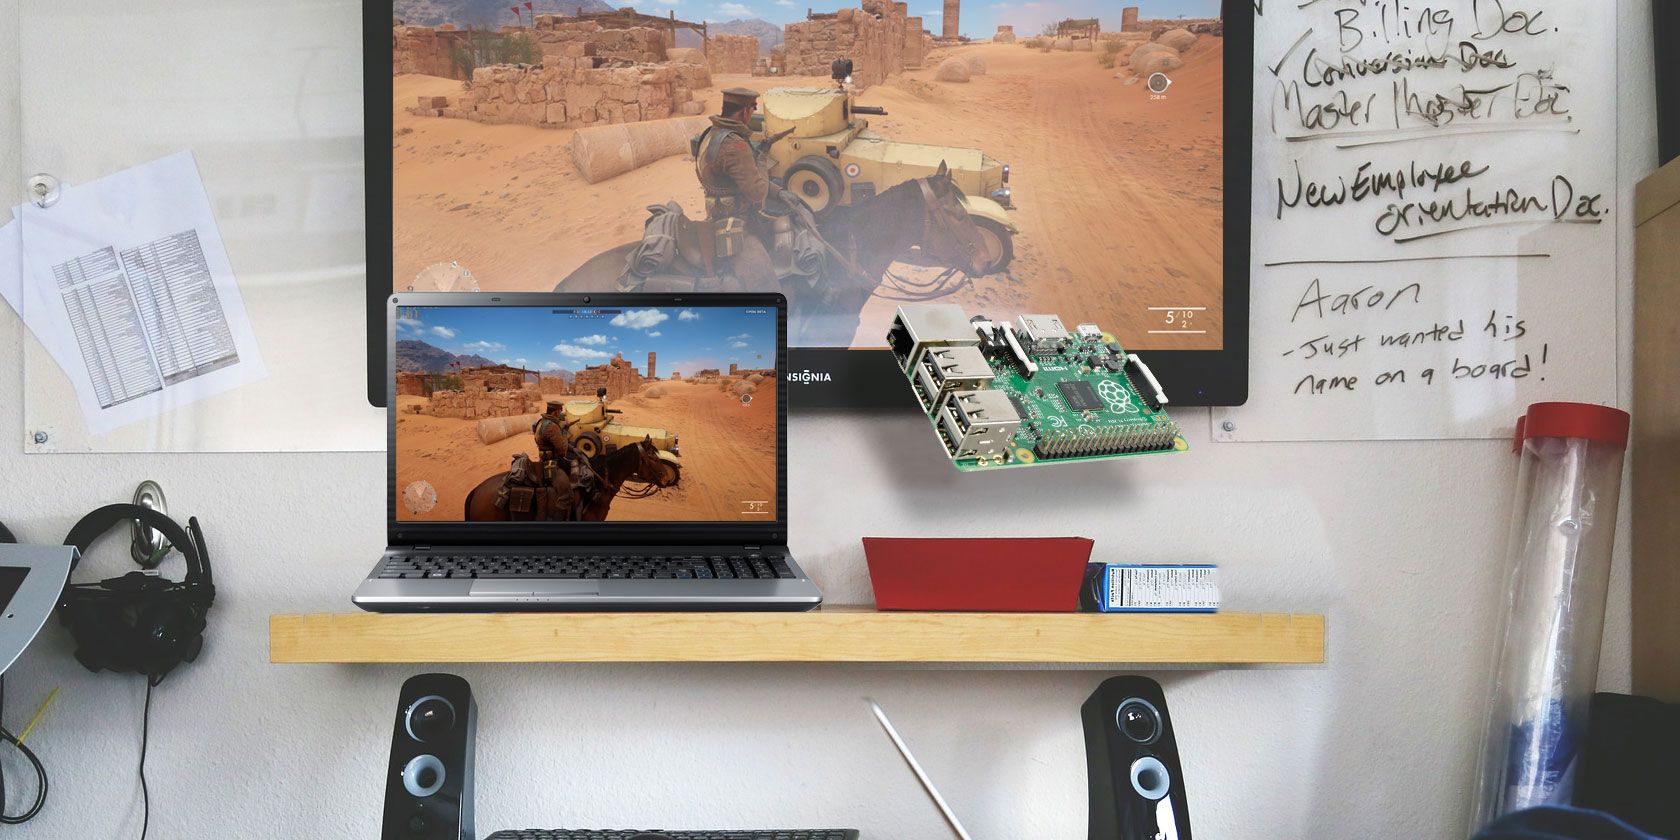 How to Stream Any PC Game to TV Using a Raspberry Pi